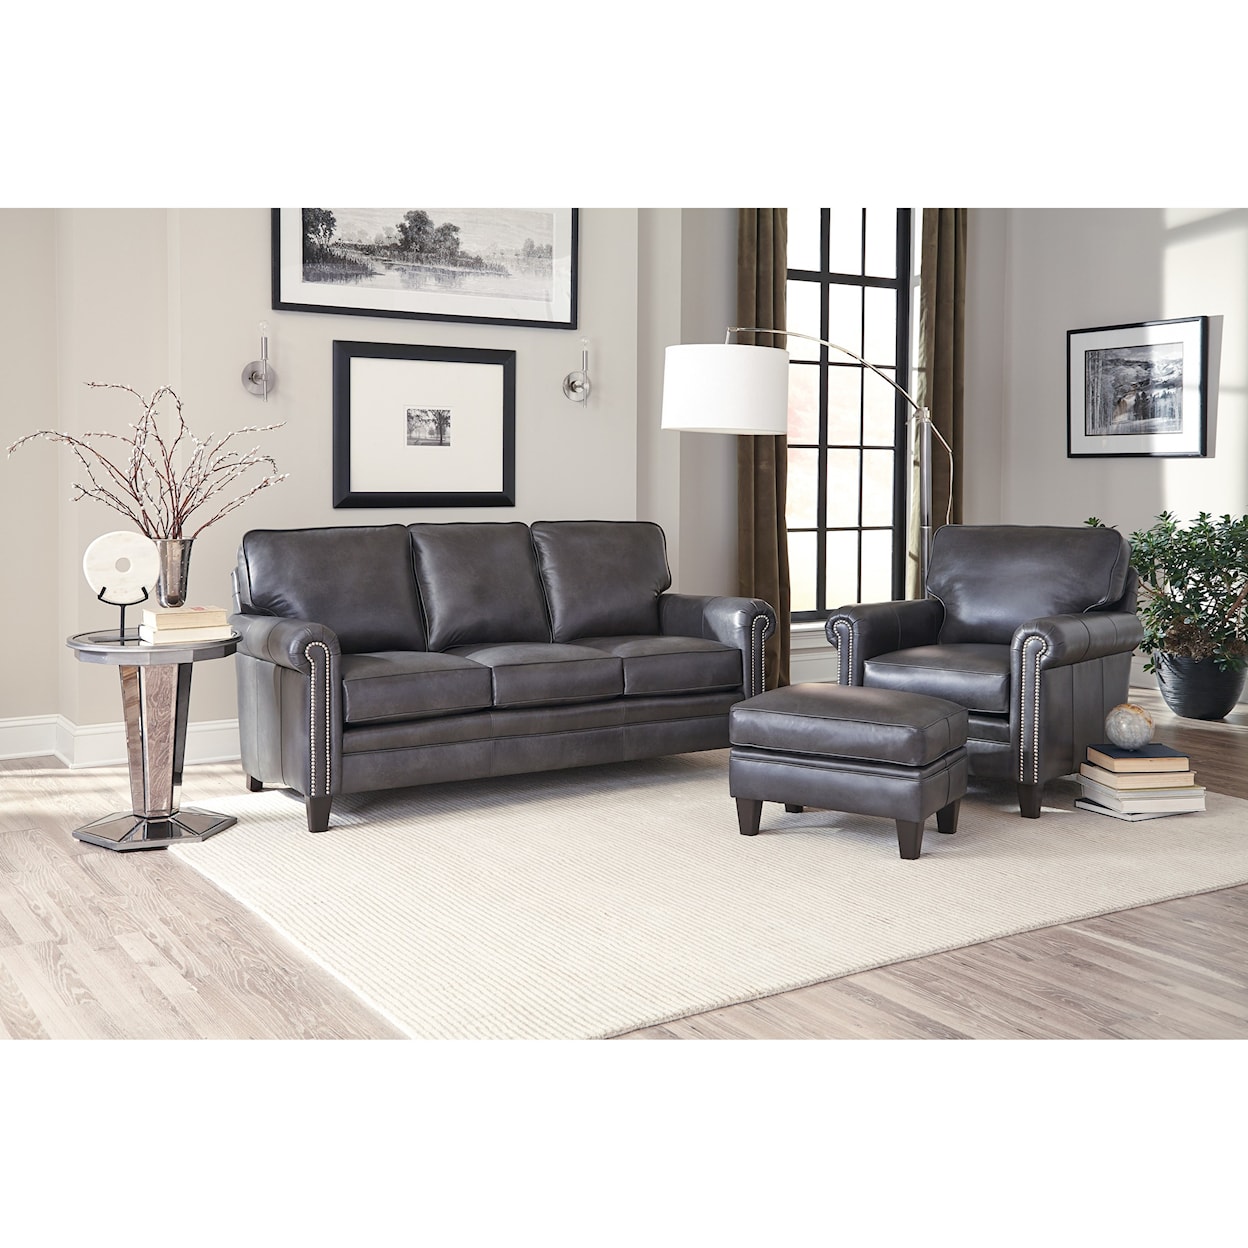 Smith Brothers 234 Mid-Size Sofa